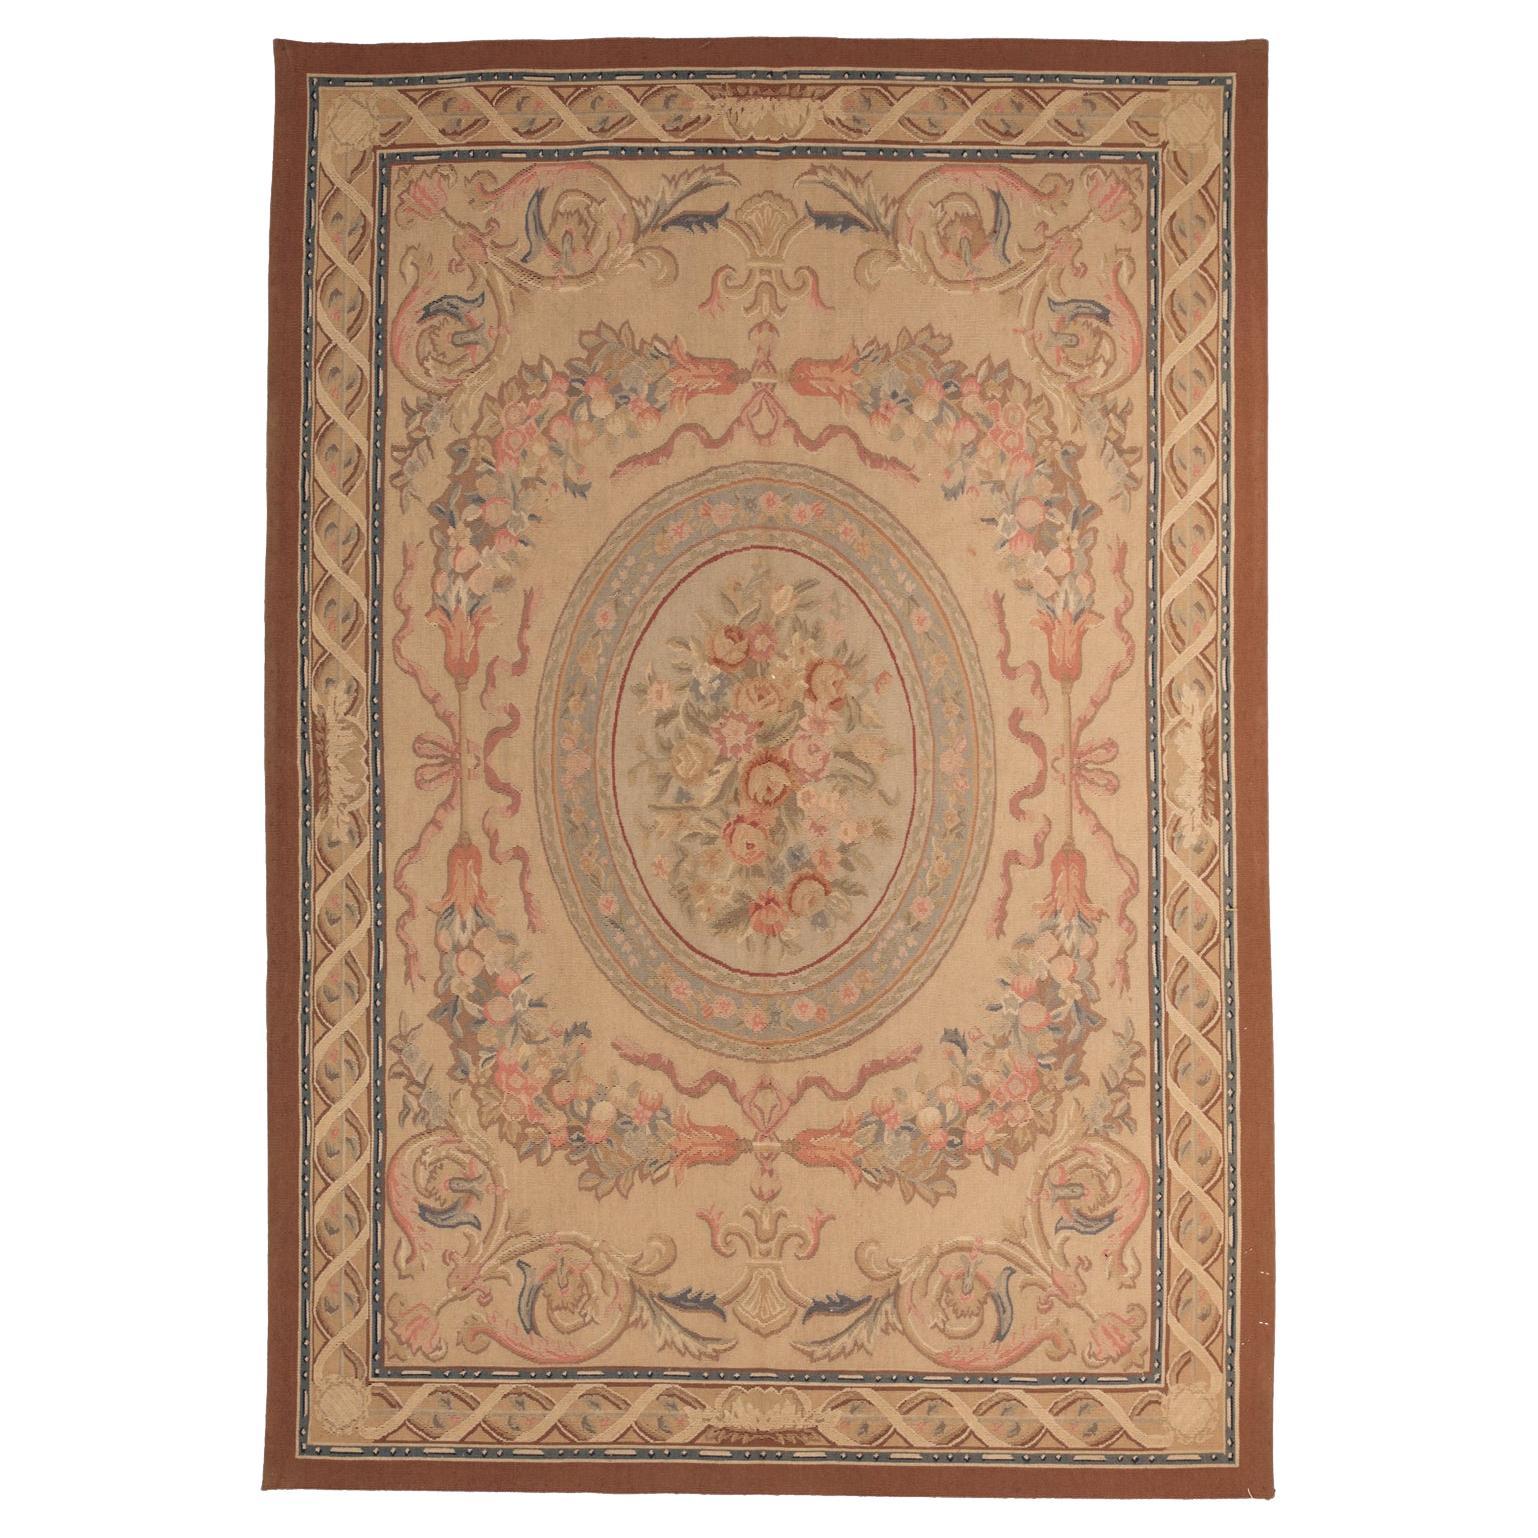 Aubusson Flat-Weave Rug Inspired by French Style with Medallion, 21st Century